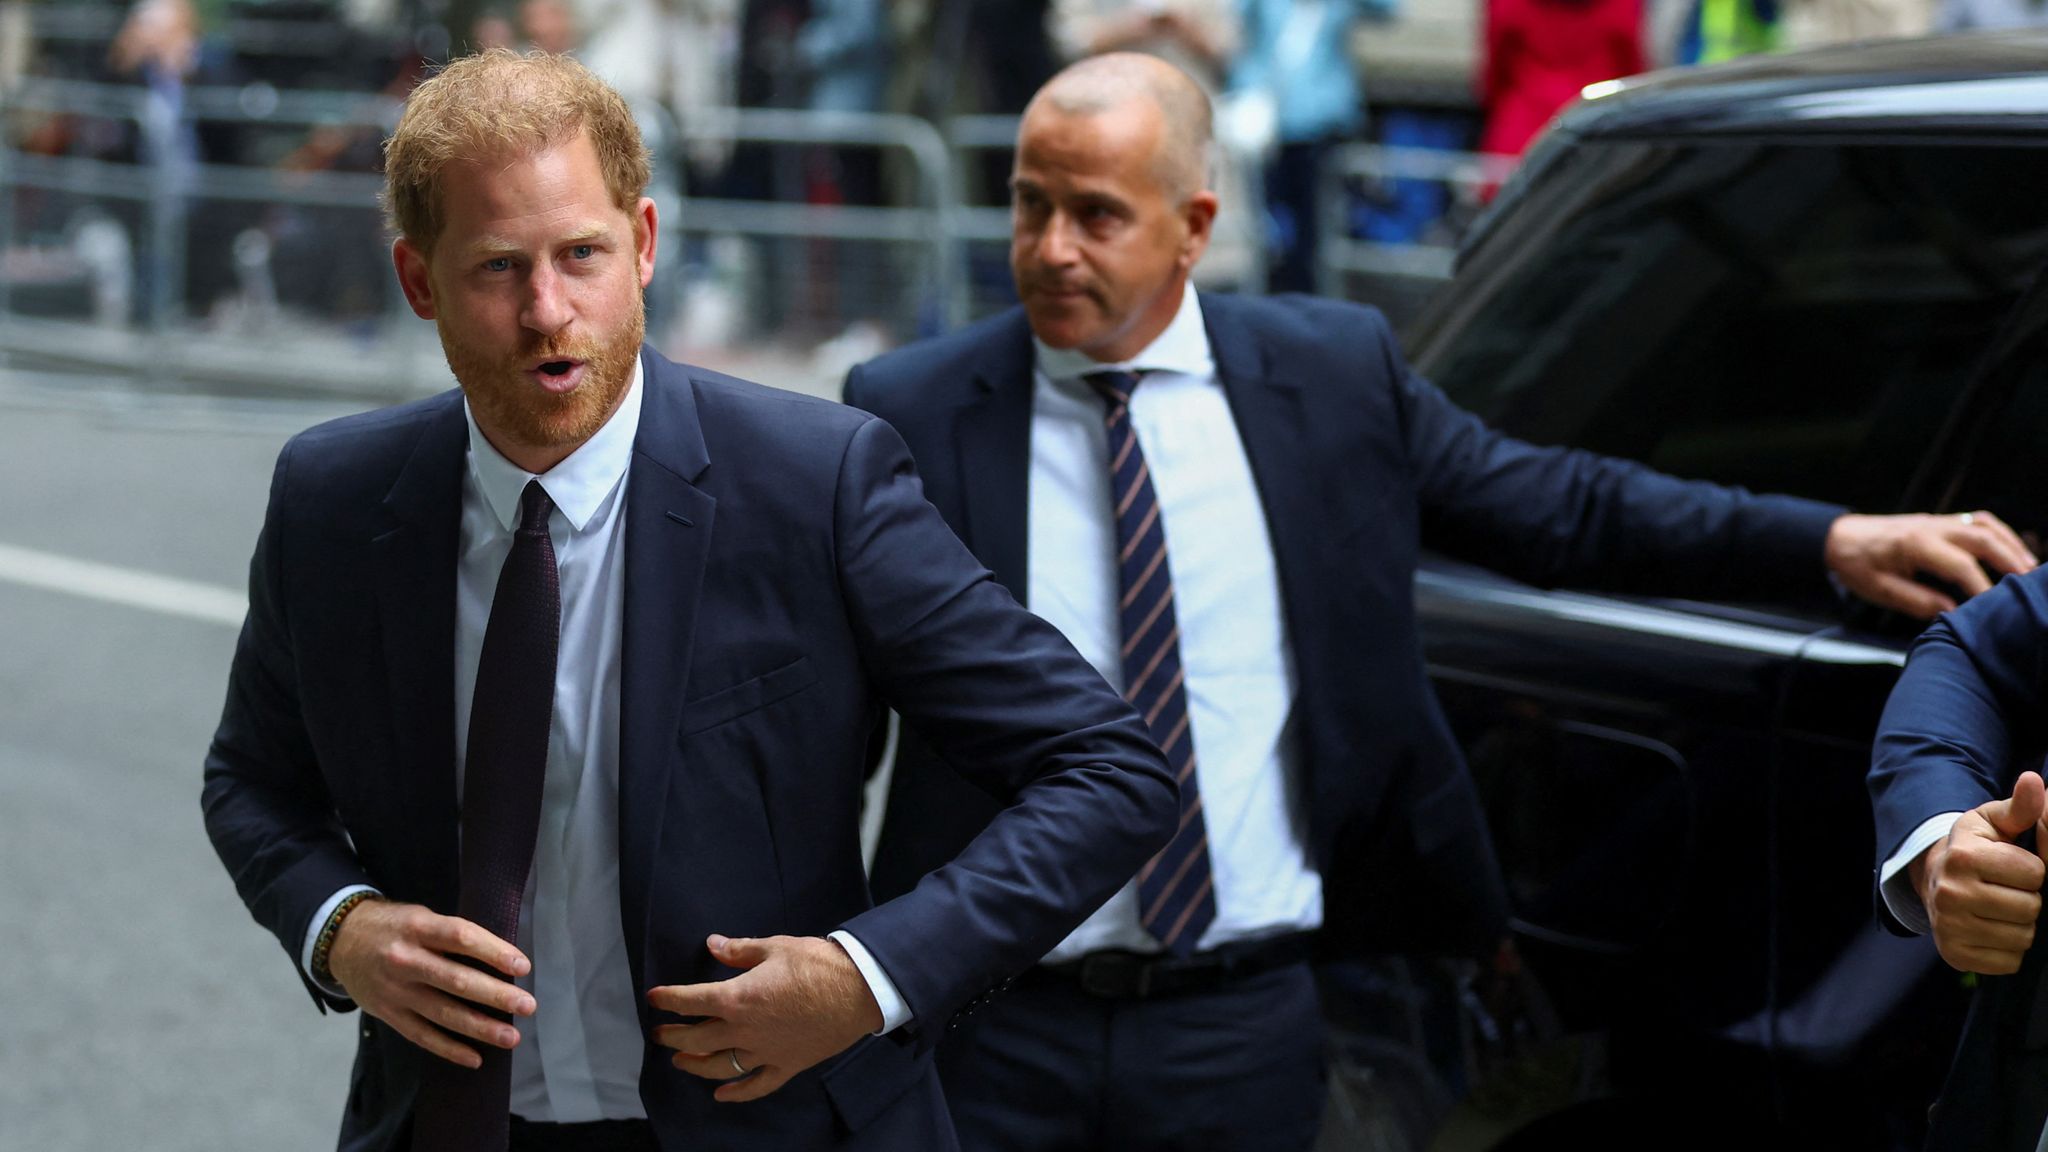 Prince Harry in court: Soft-spoken duke kept emotions in check during ...